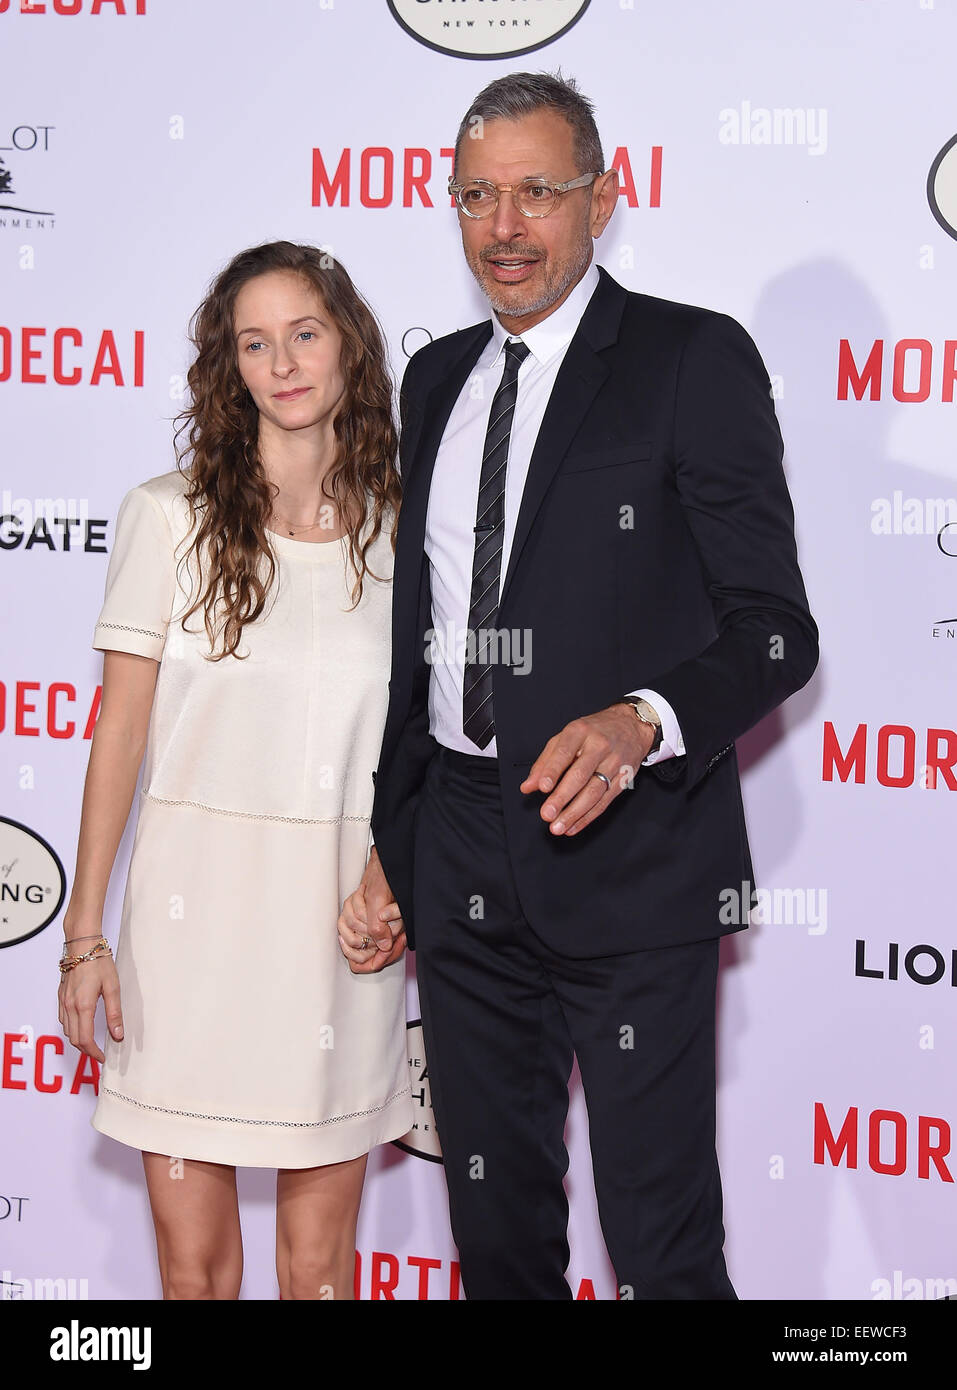 Hollywood, California, USA. 21st Jan, 2015. Jeff Goldblum & Emilie Livingston arrives for the premiere of the film 'Mortdecai' at the Chinese theater. Credit:  Lisa O'Connor/ZUMA Wire/Alamy Live News Stock Photo